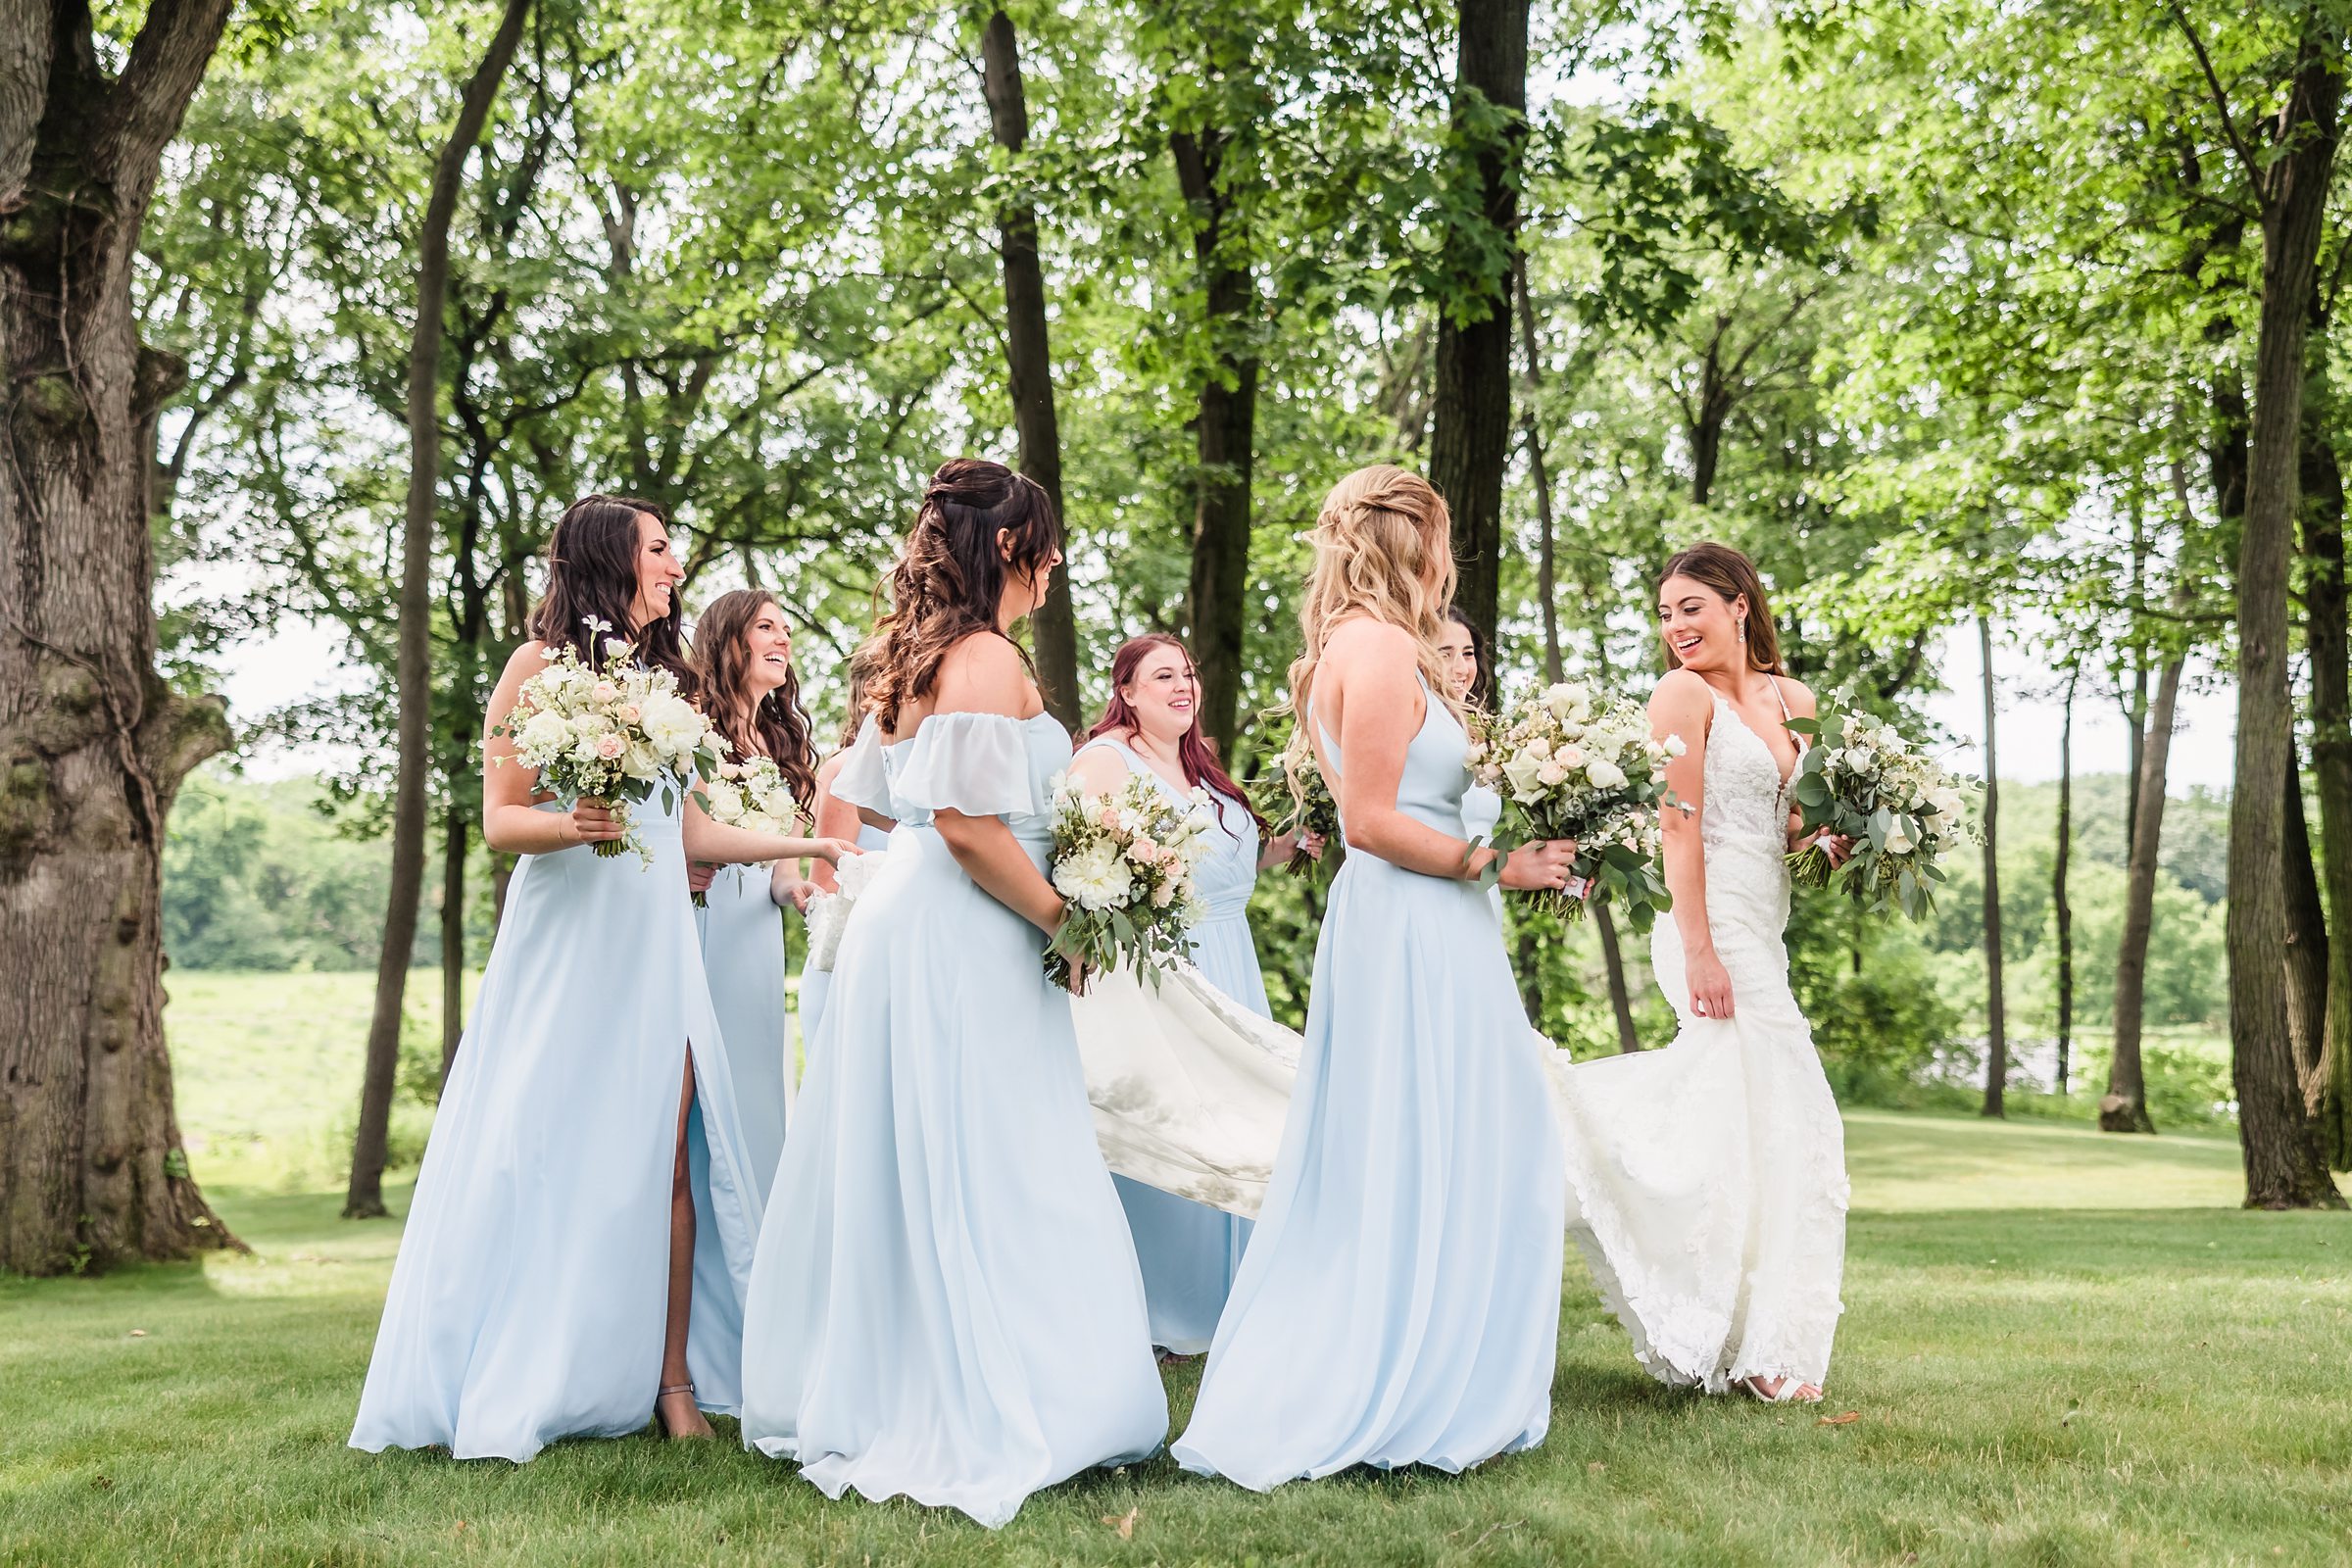 Bride with her bridesmaids during her wedding at the Monte Bello Estate in Lemont, Illinois.